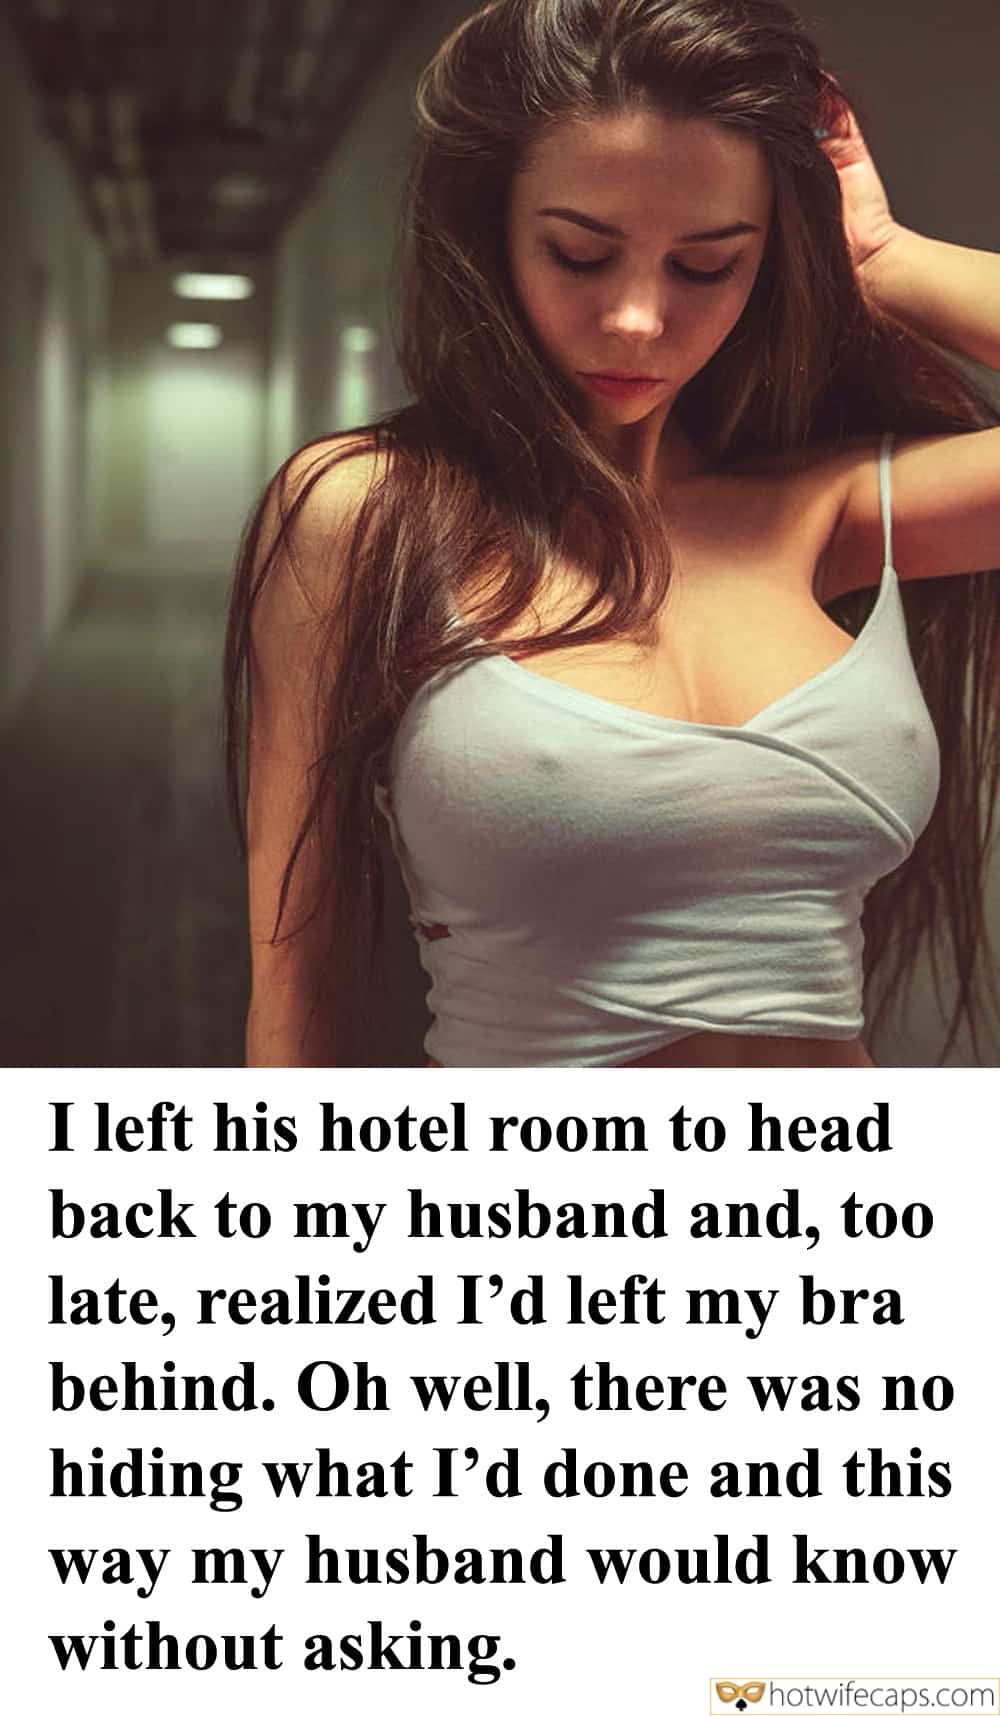 Sexy Memes Cuckold Cleanup Cheating Bull Boss hotwife caption: I left his hotel room to head back to my husband and, too late, realized I’d left my bra behind. Oh well, there was no hiding what I’d done and this way my husband would know without asking. The Wife...